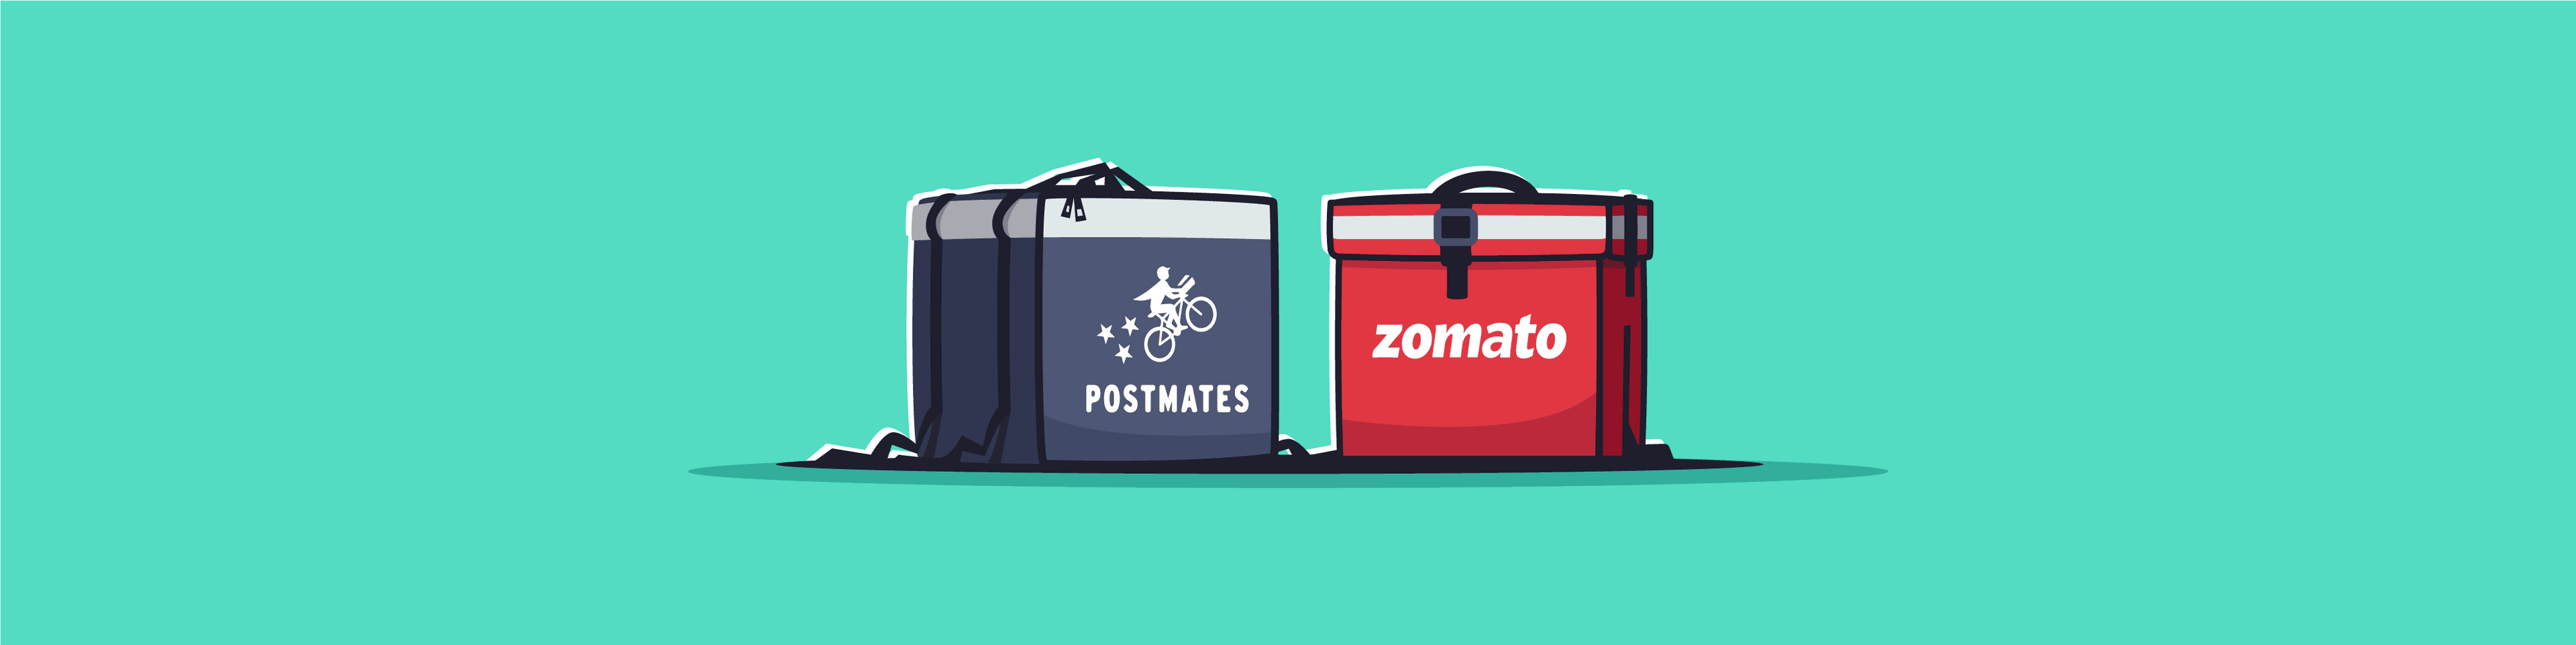 How to build a food delivery on-demand app like Postmates and Zomato